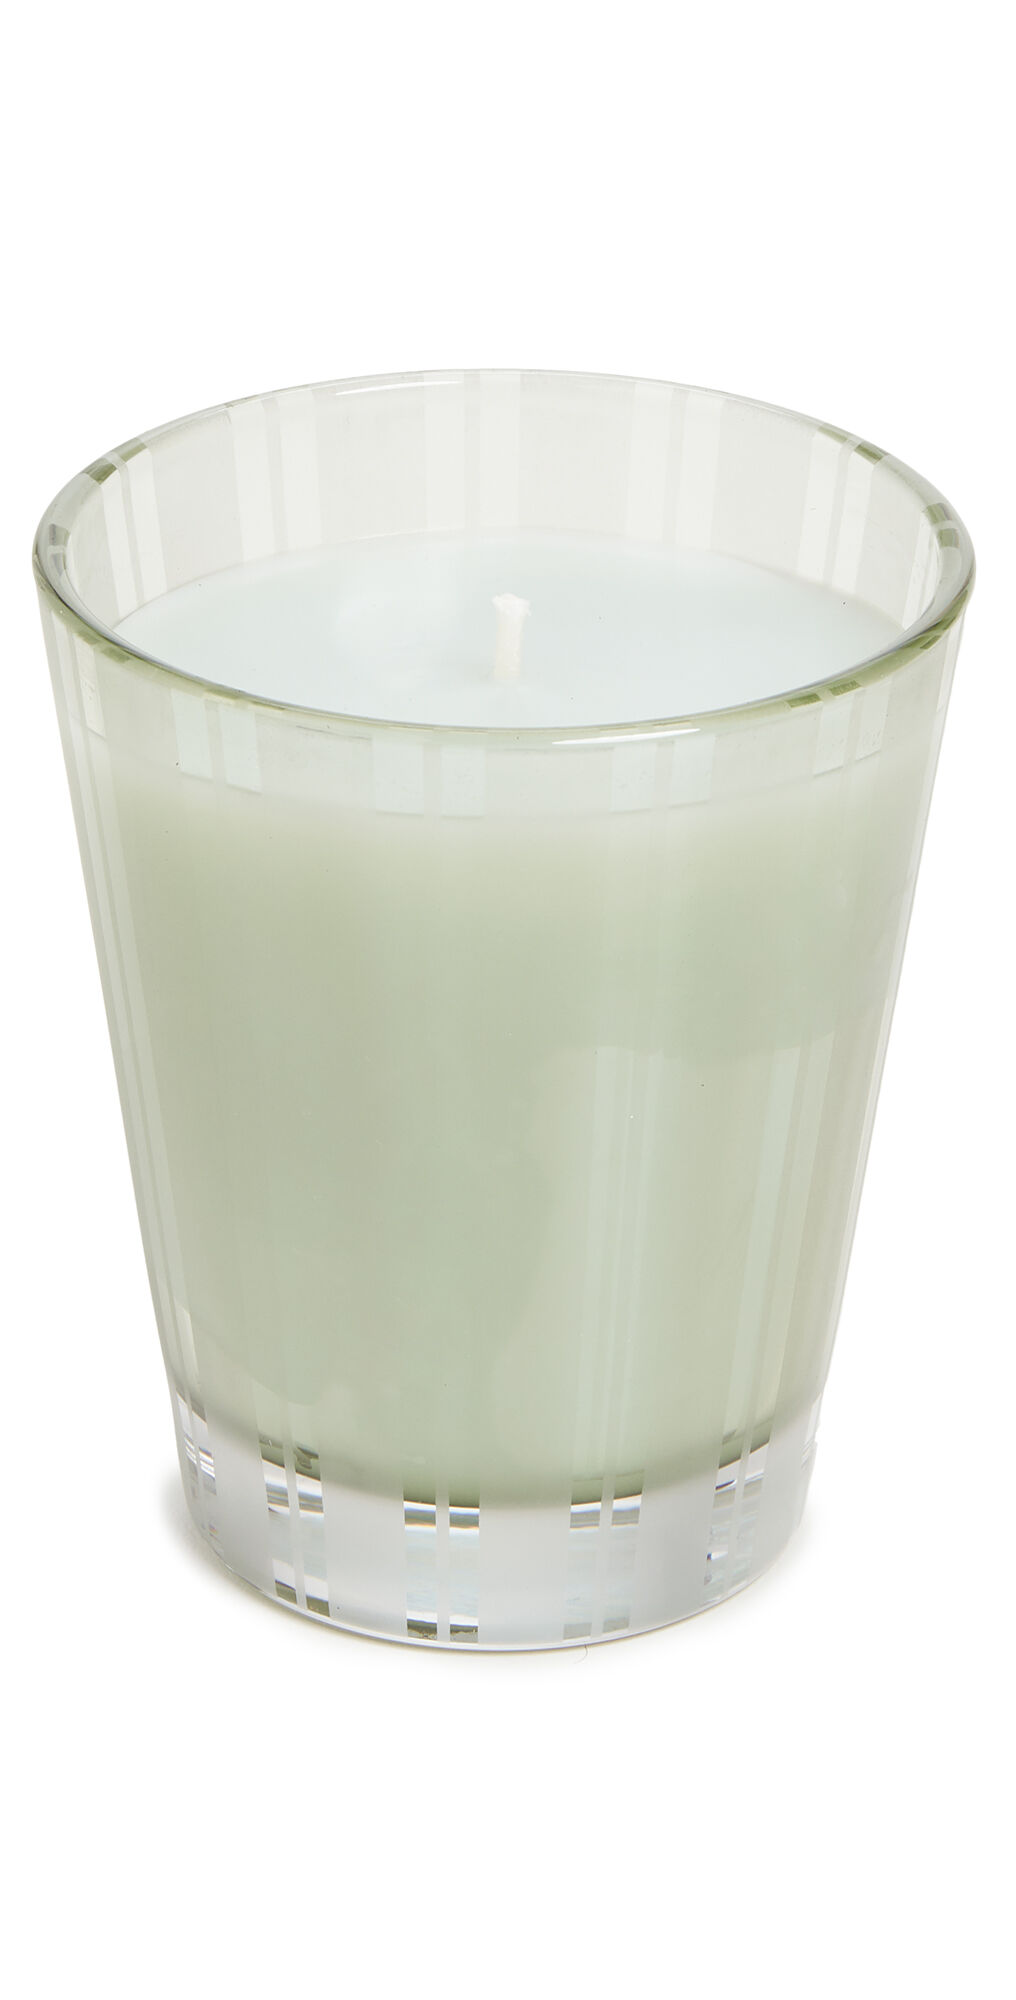 Nest Fragrance Classic Candle Wild Mint & Eucalyptus One Size  Wild Mint & Eucalyptus  size:One Size